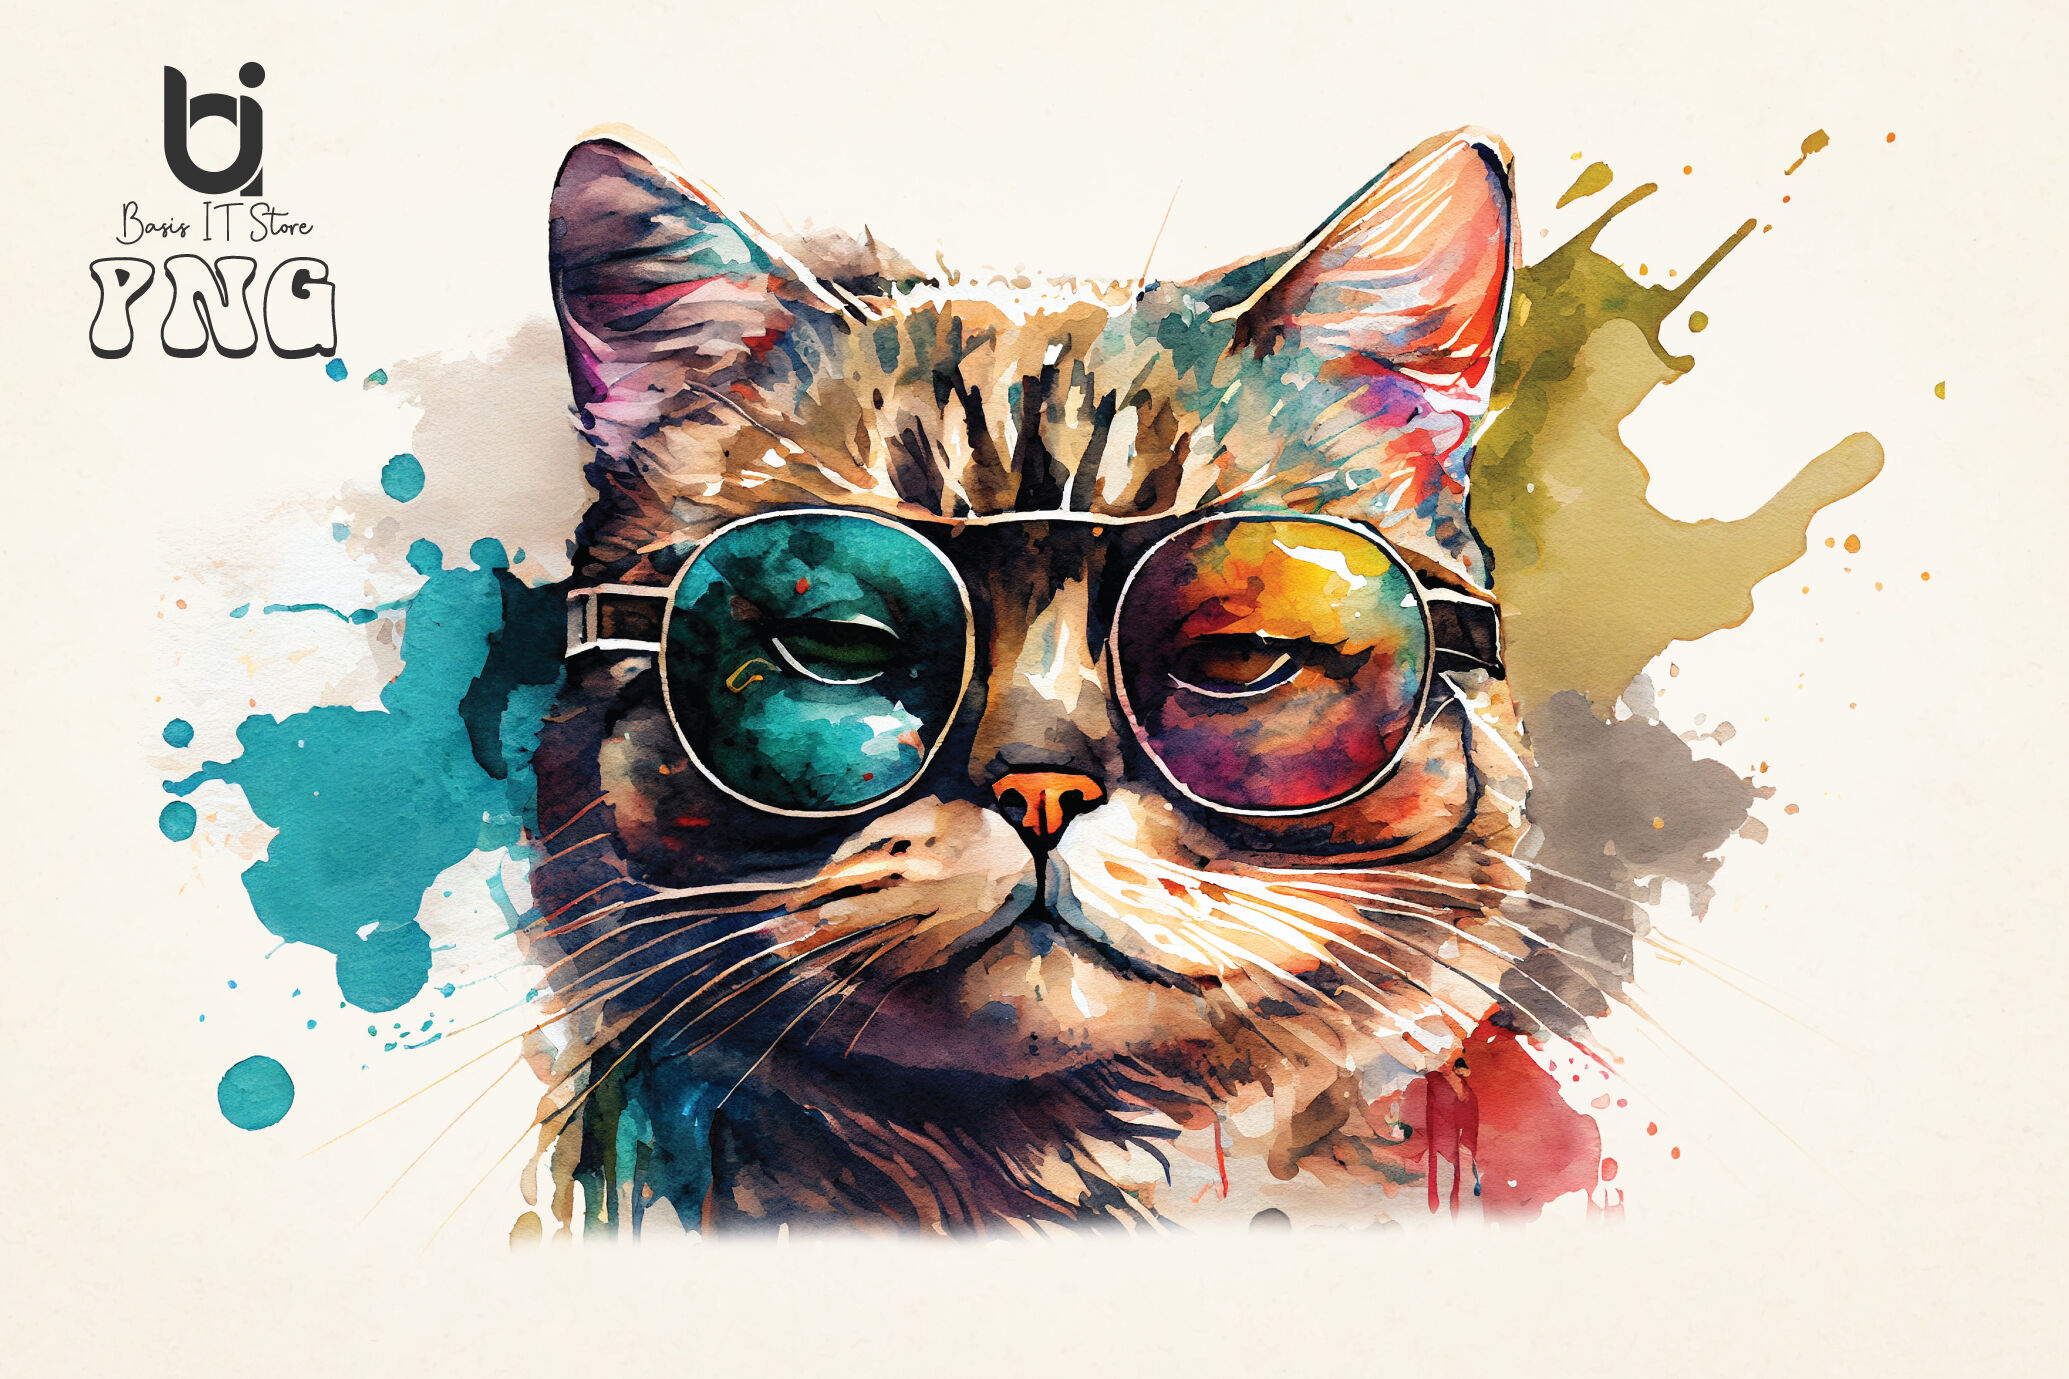 Color Your Own Cat Watercolor Surprise Kit by Creatology™